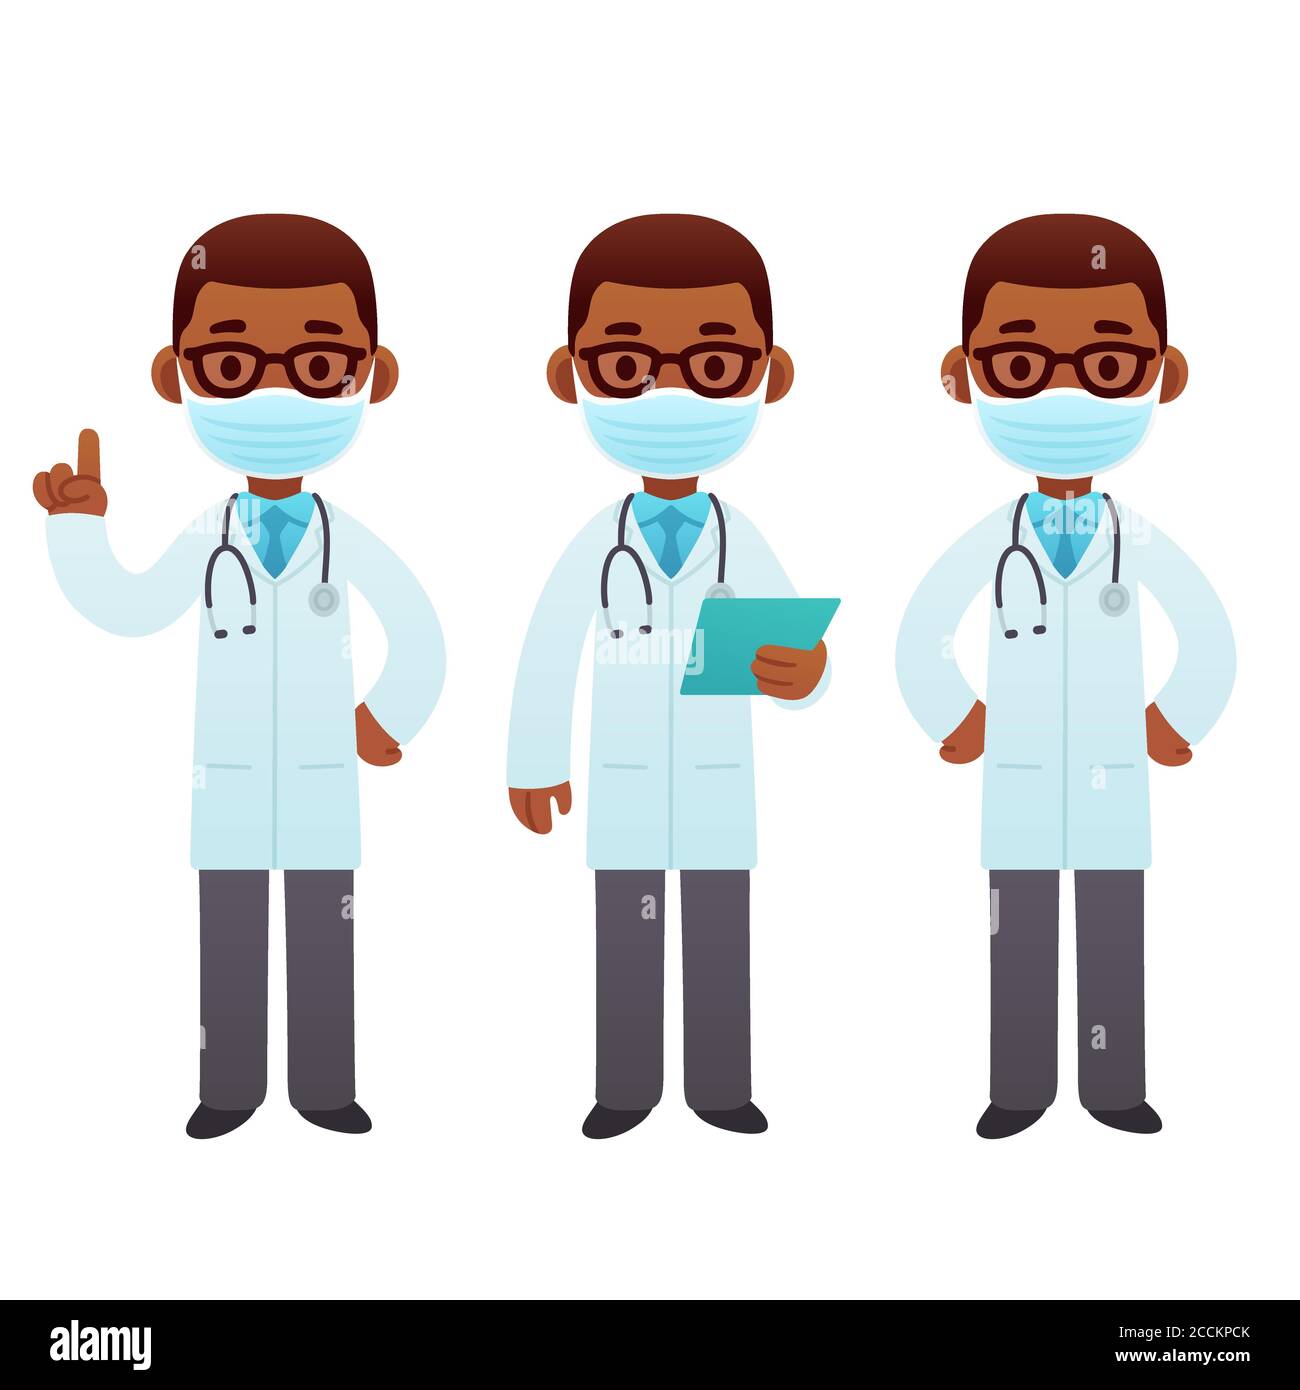 Black doctor cartoon illustration set. Male African American doctor in face mask standing and pointing. Cute cartoon medical character vector clip art Stock Vector